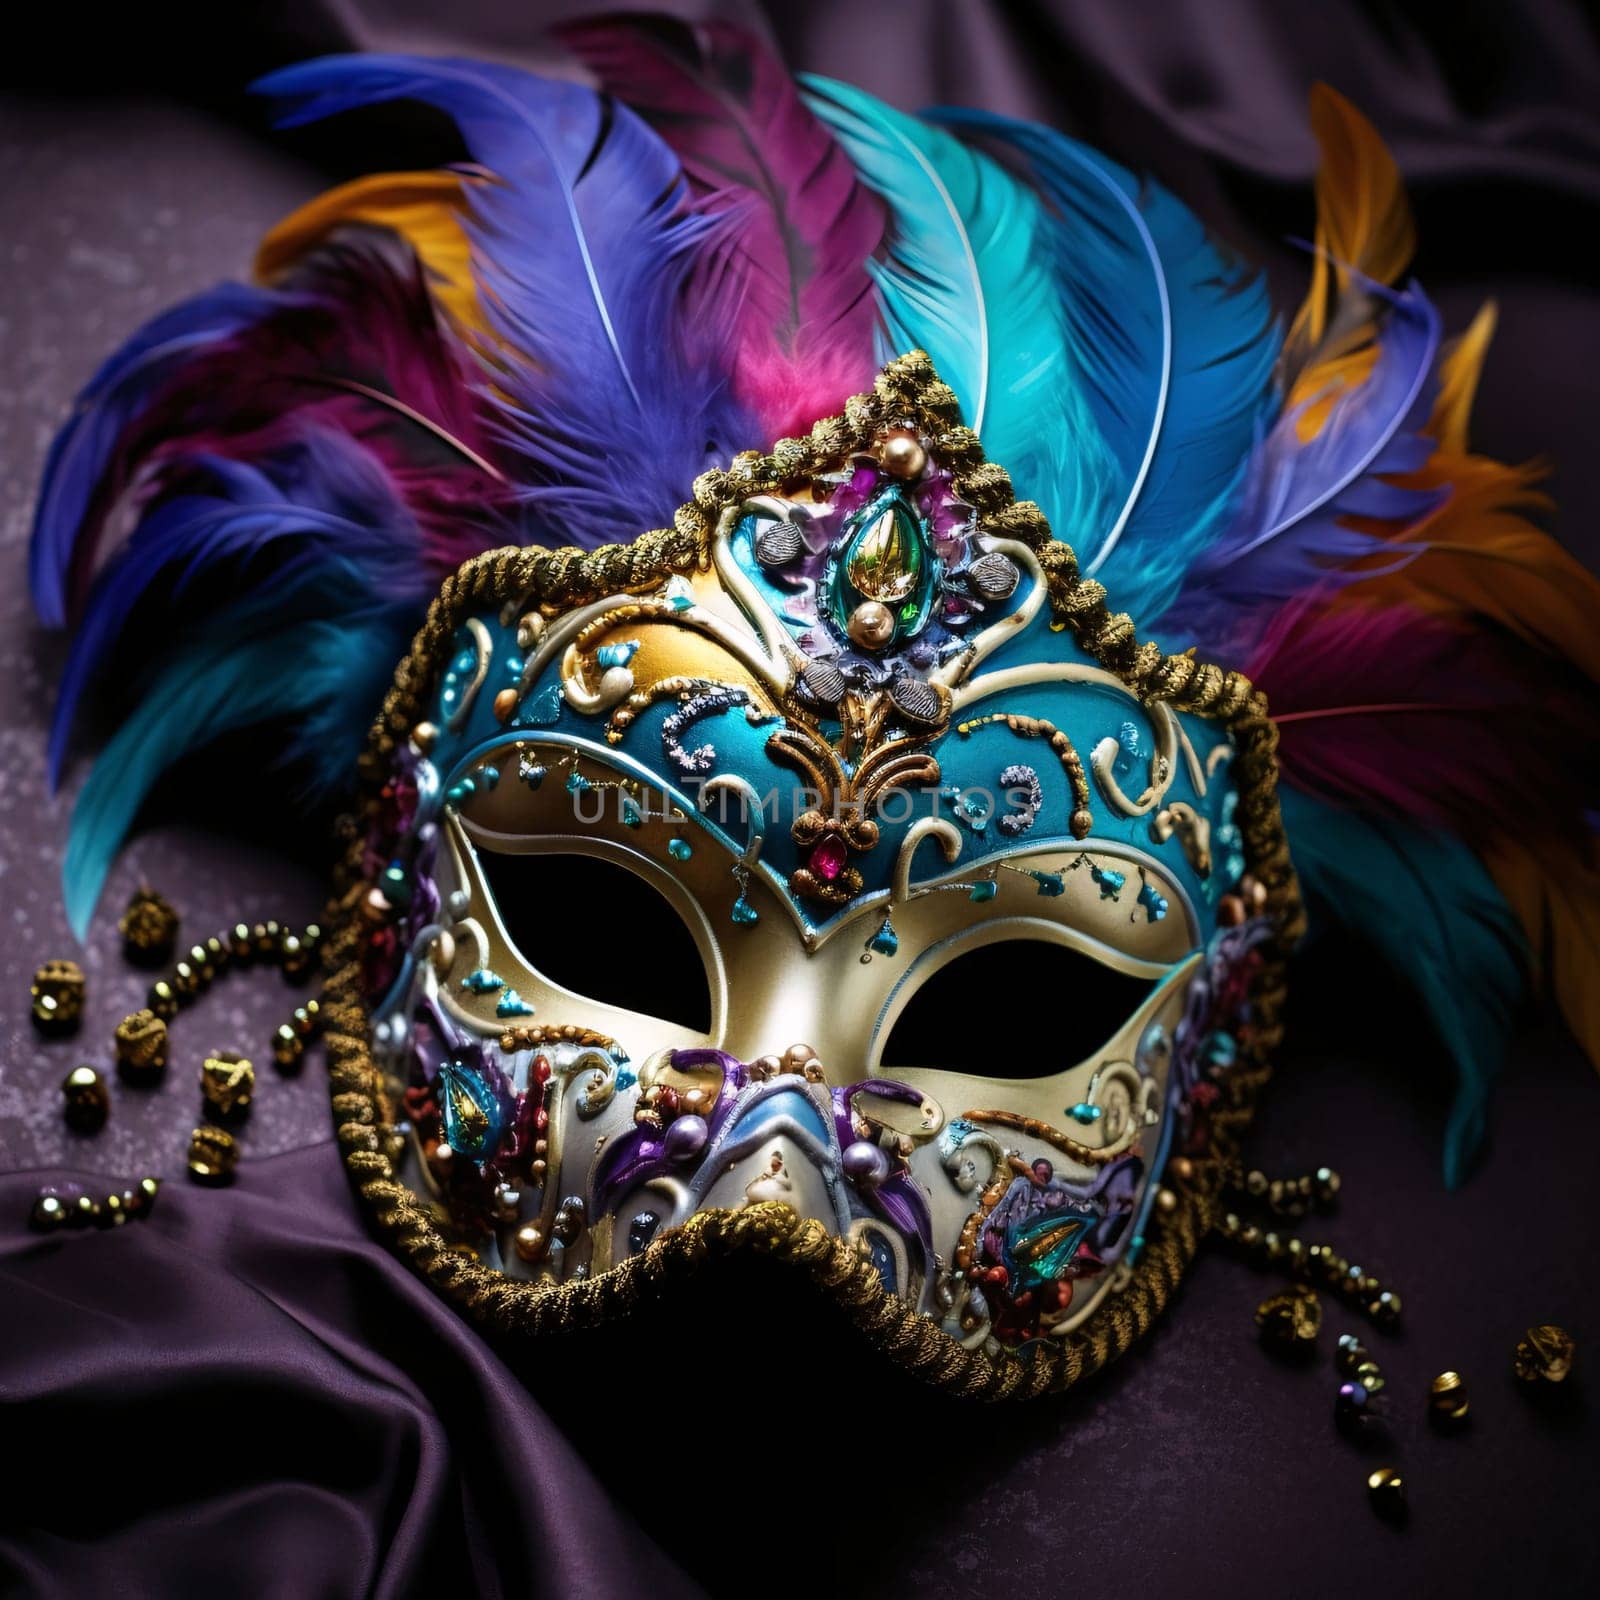 Gold eye mask with colorful decorations and feathers on a dark background. Carnival outfits, masks and decorations. A time of fun and celebration before the fast.